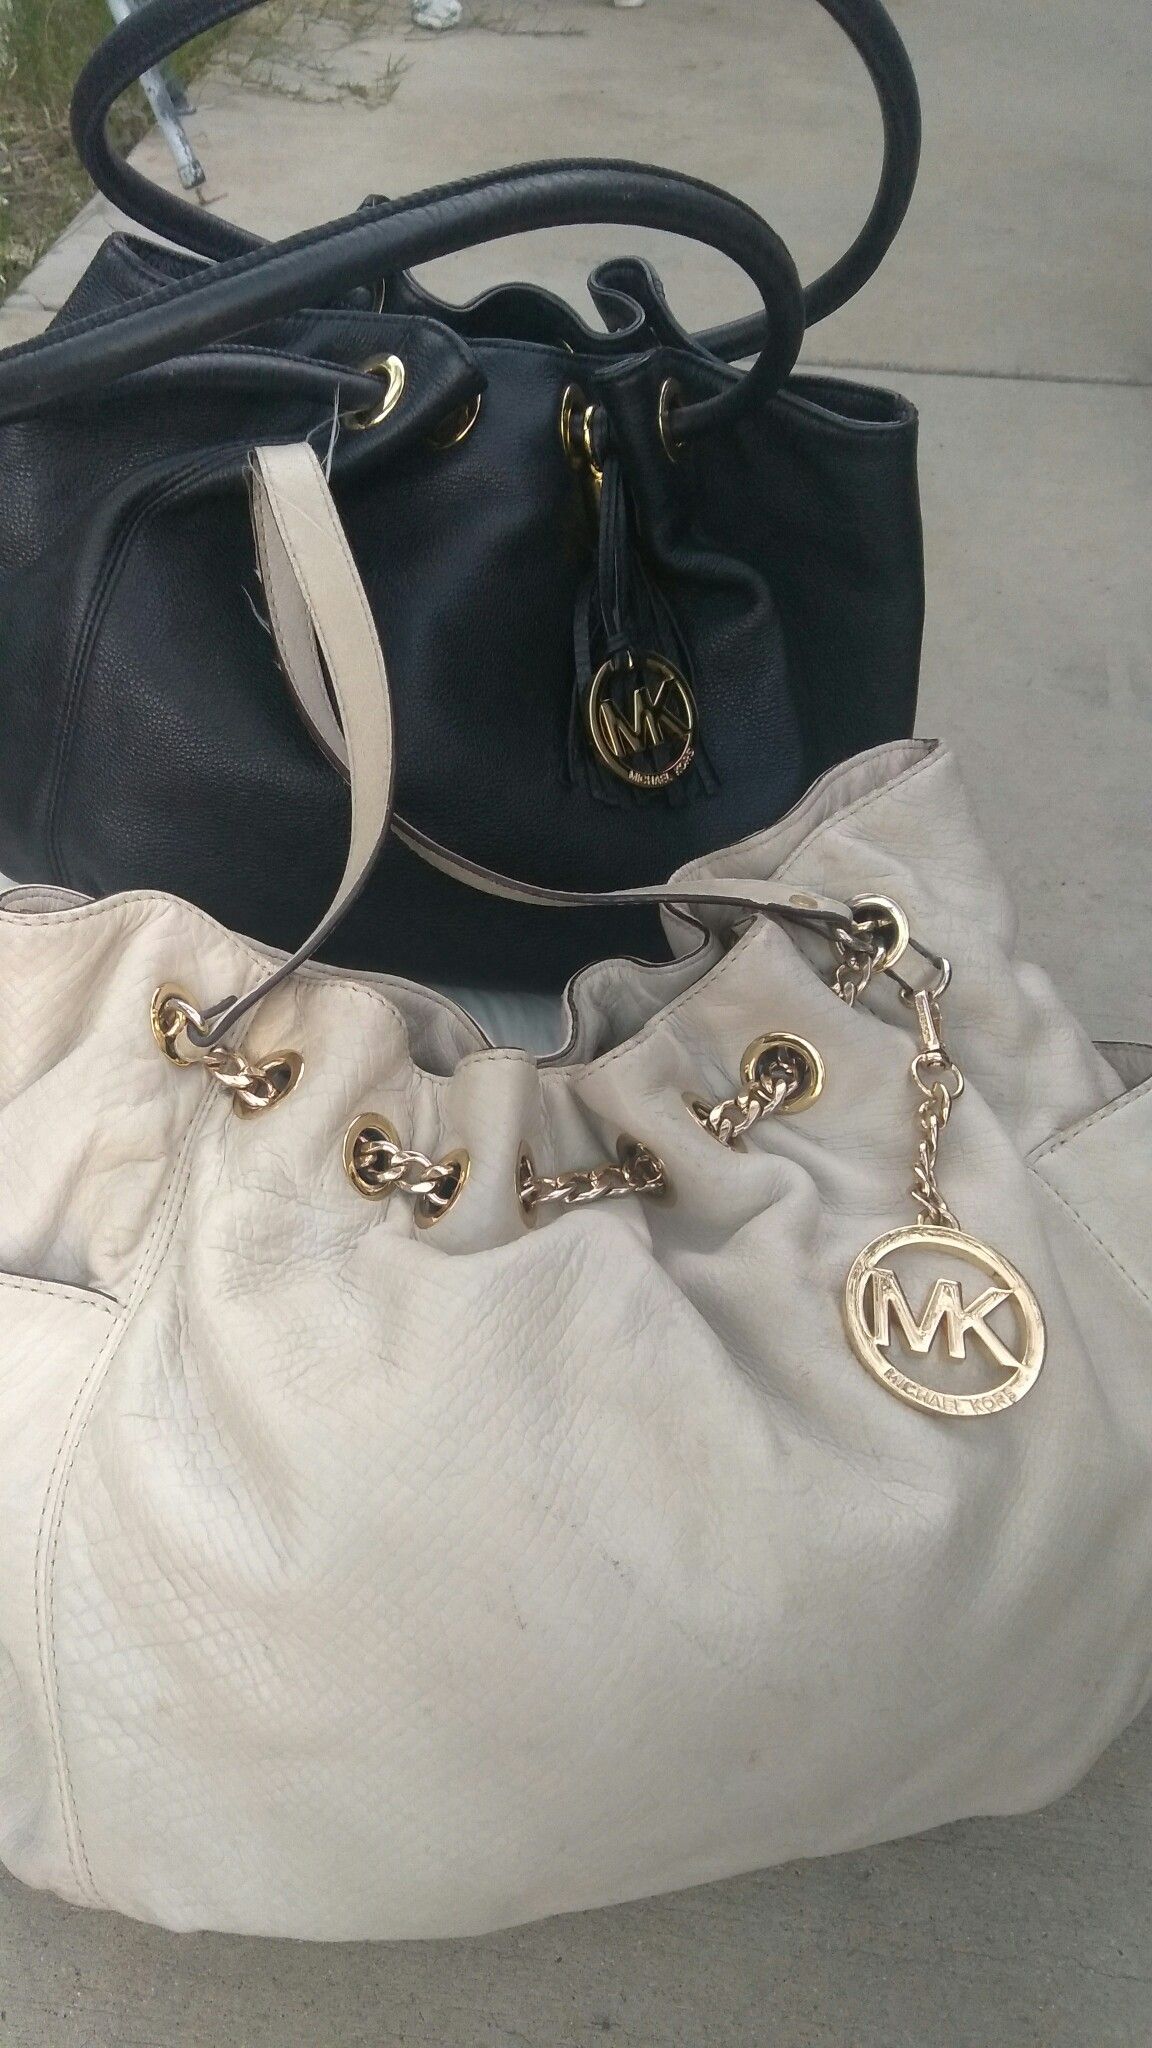 MK LEATHER BAGS BUNDLE USED * FIRM $$